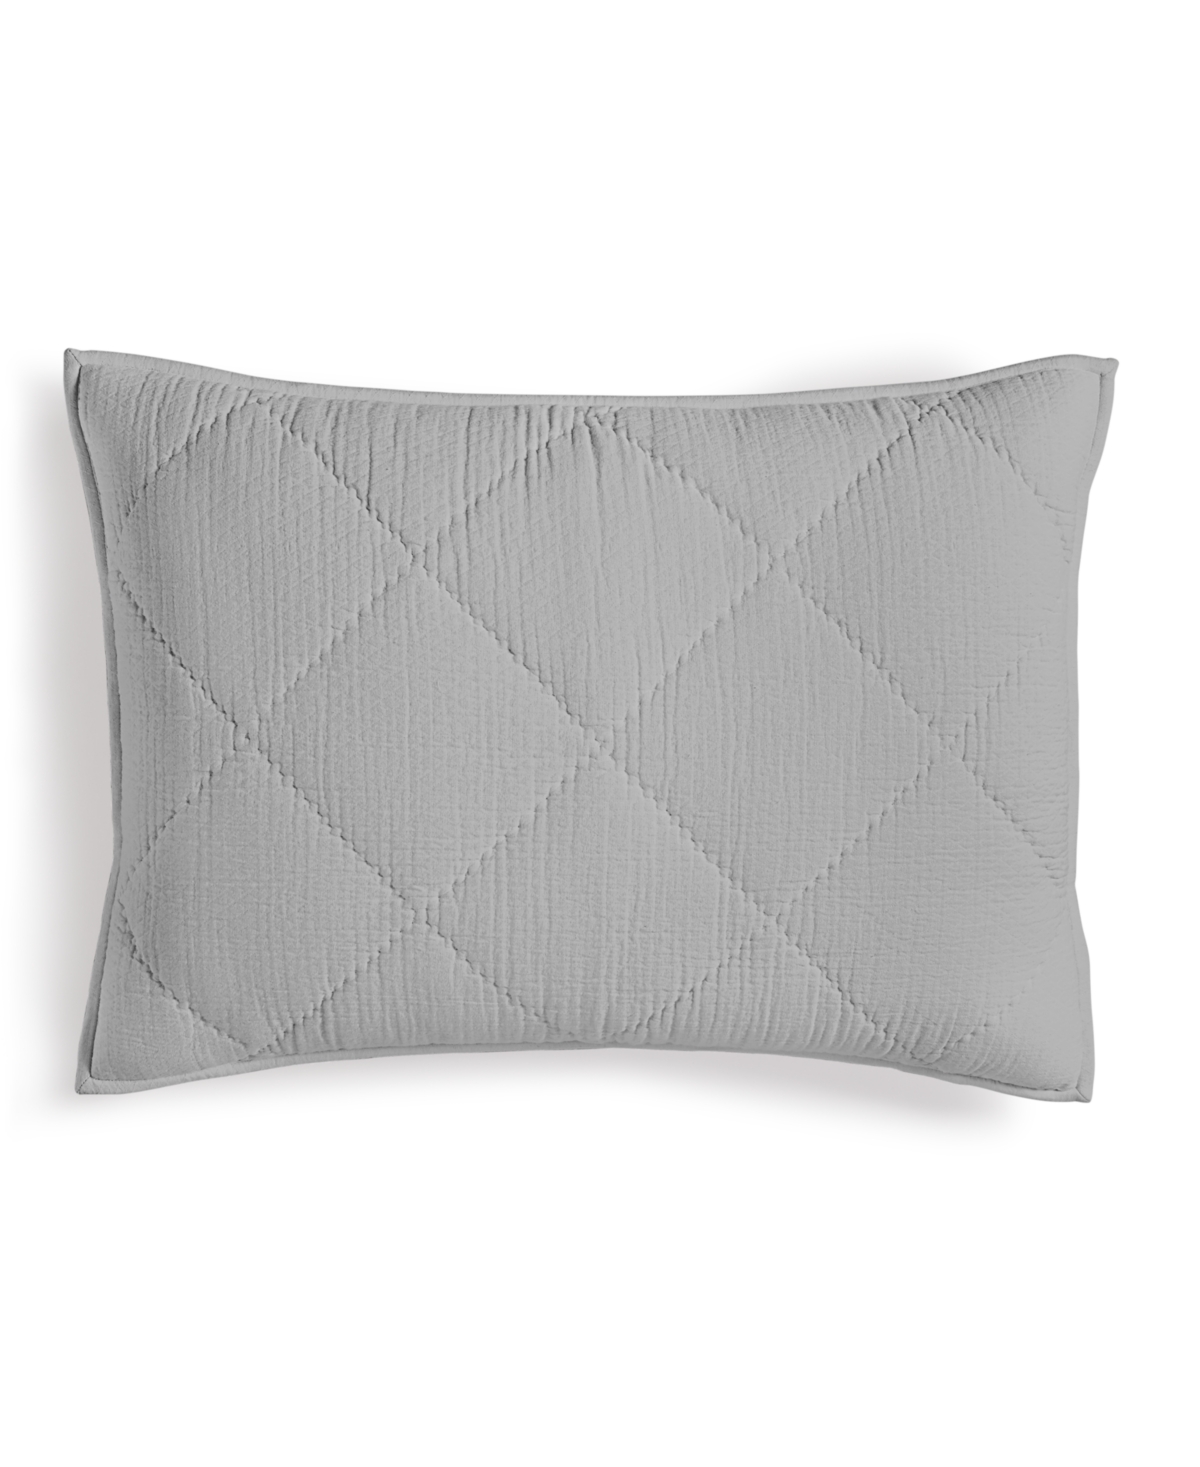 Dobby Diamond Quilted Sham, King, Created for Macy's - Grey